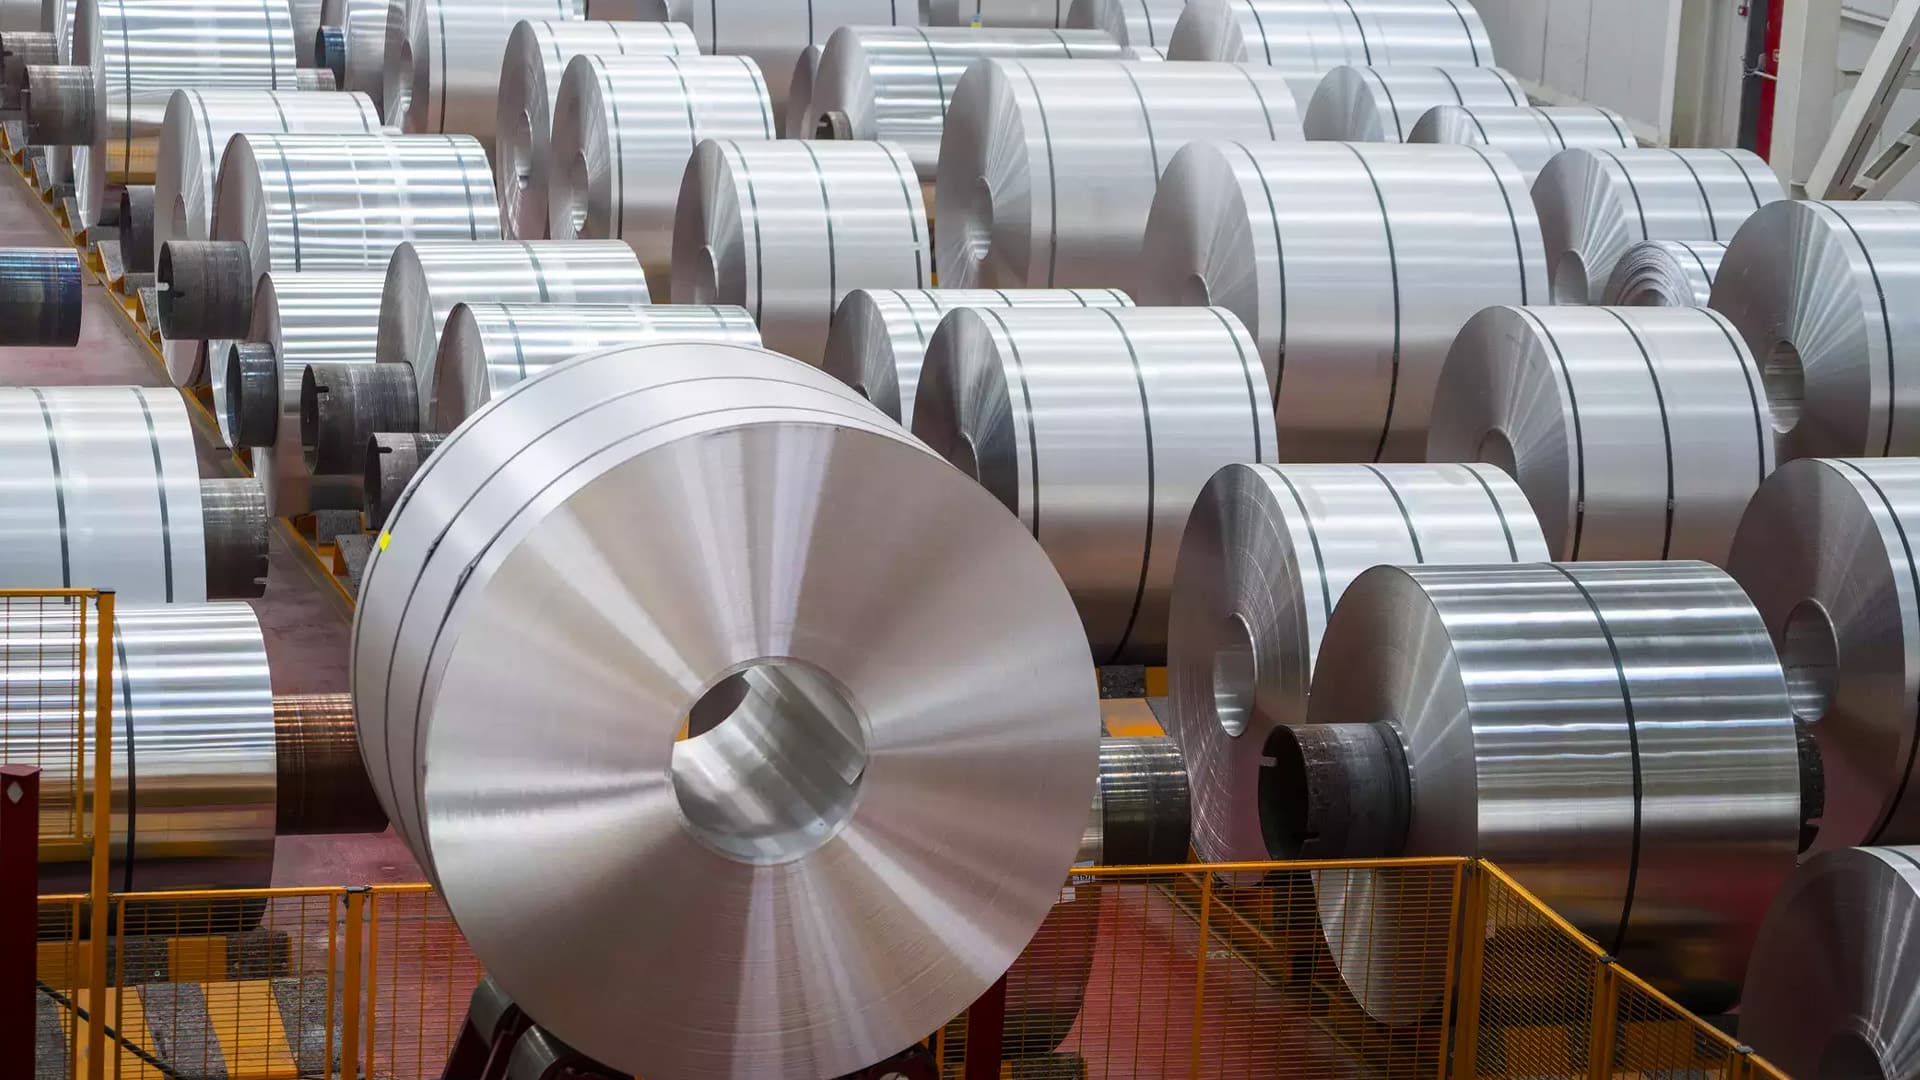 Govt plans to introduce PLI 2.0 for specialty steel: Scindia